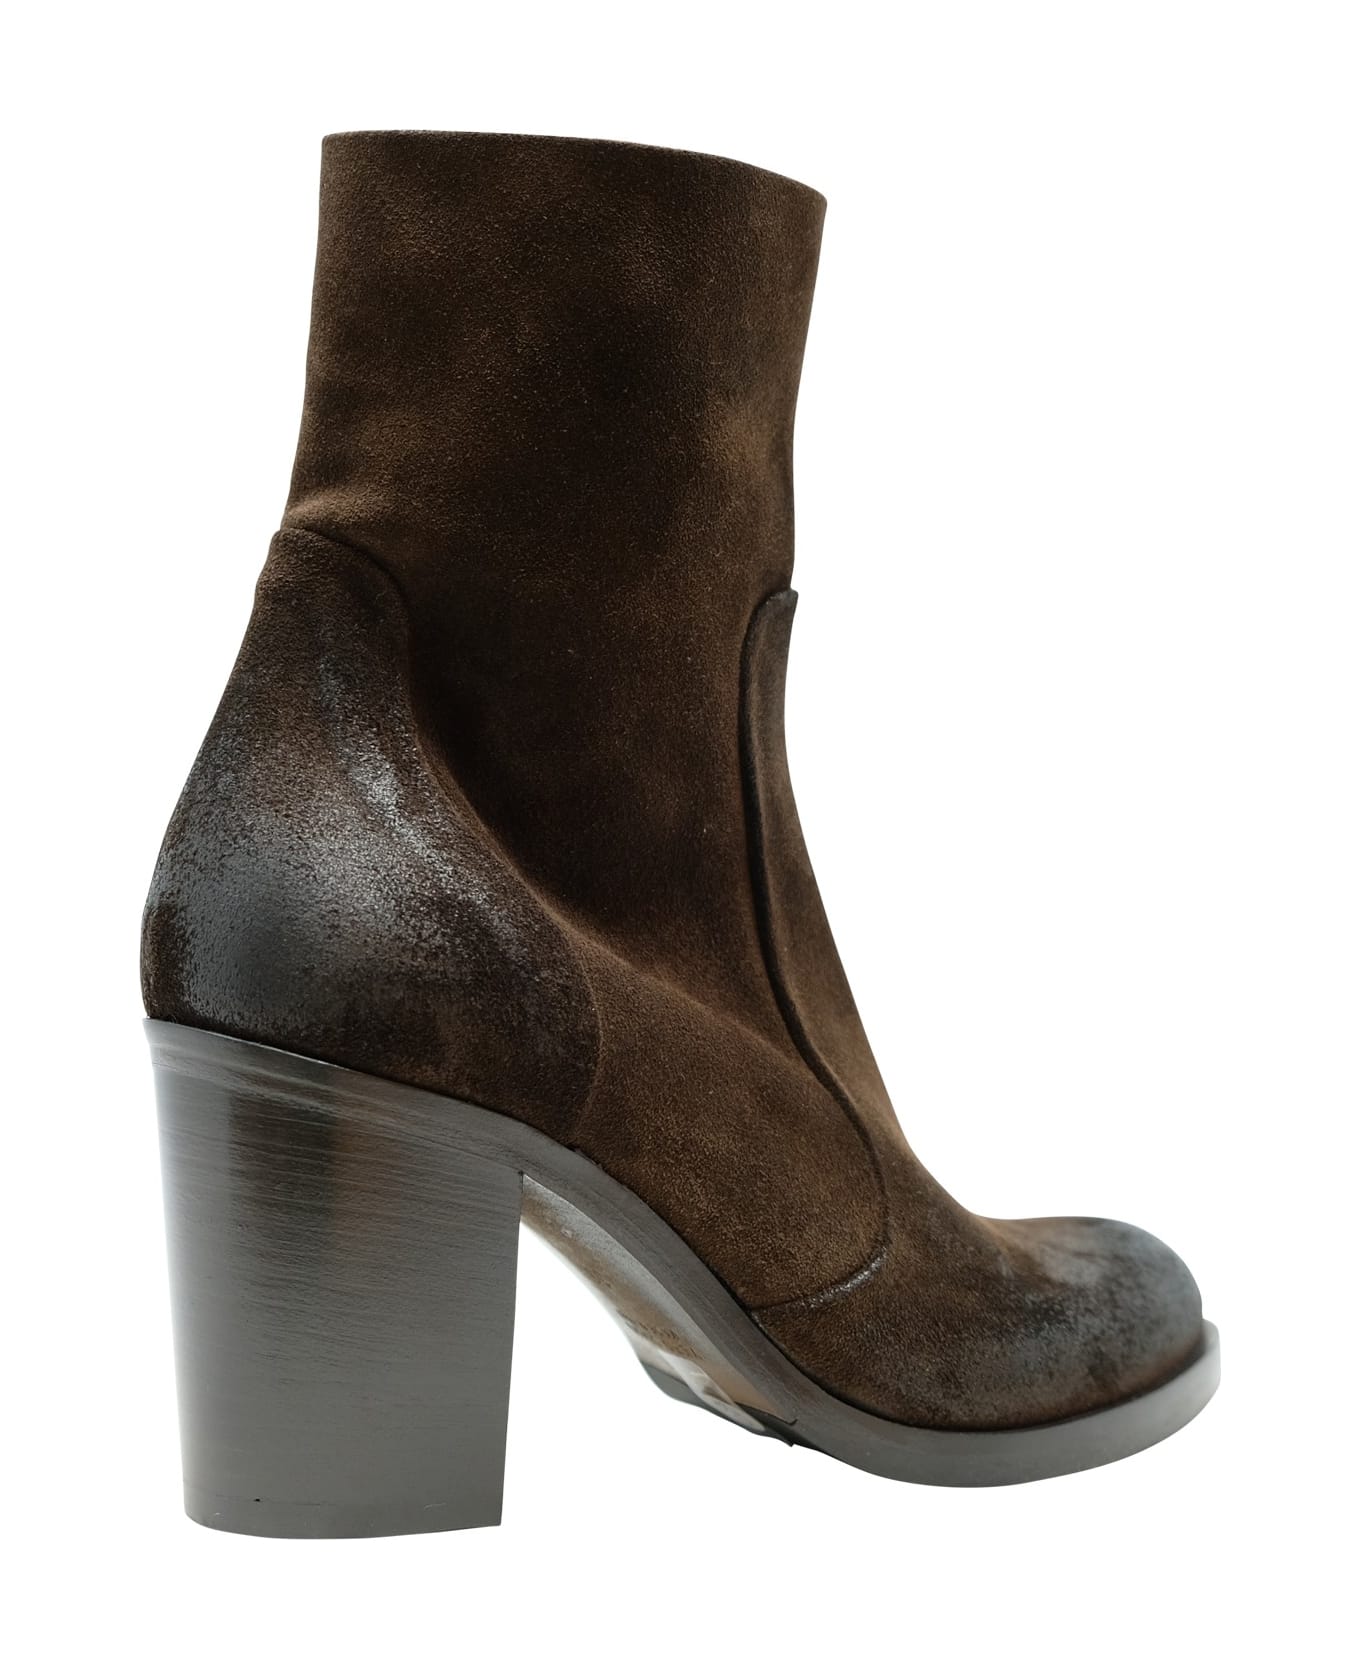 Elena Iachi Suede Leather Ankle Boots - BROWN